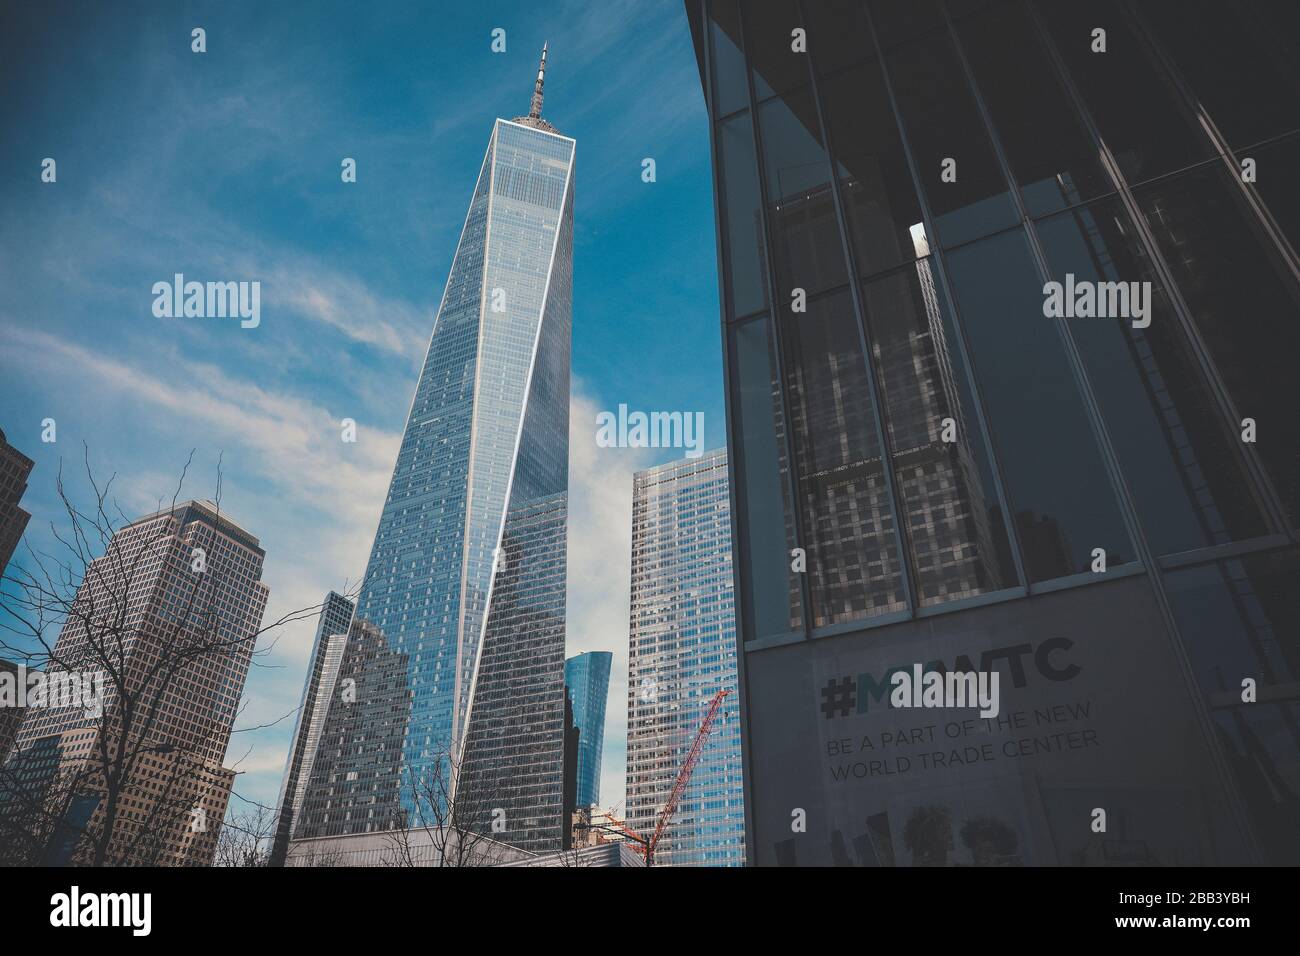 View Of One World Trade Center Skyscraper With MYWTC Hashtag Stock Photo